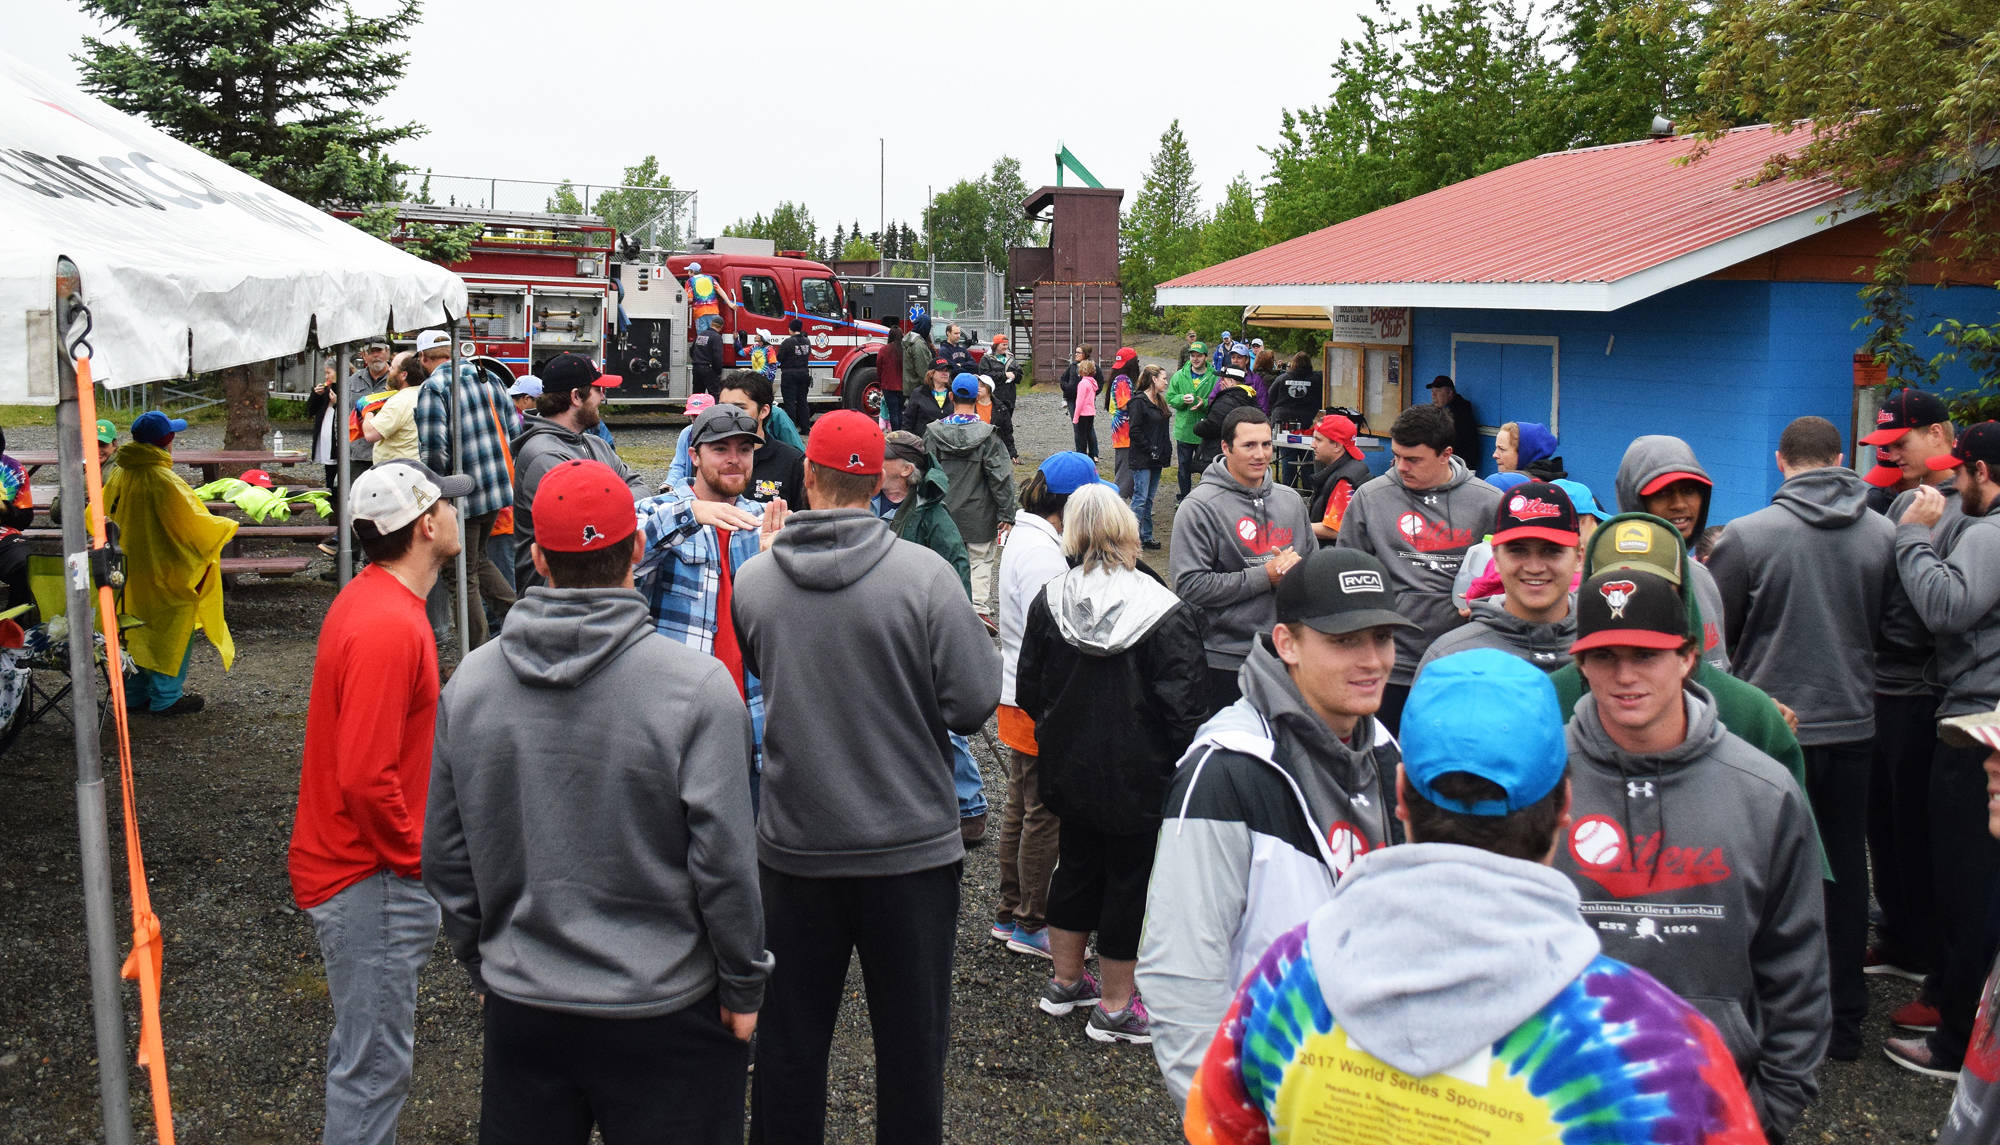 Peninsula Oilers players and Frontier Community Services clients gather for a friendly meet-and-greet barbeque June 29 at the Soldotna Little League fields. (Photo by Joey Klecka/Peninsula Clarion)